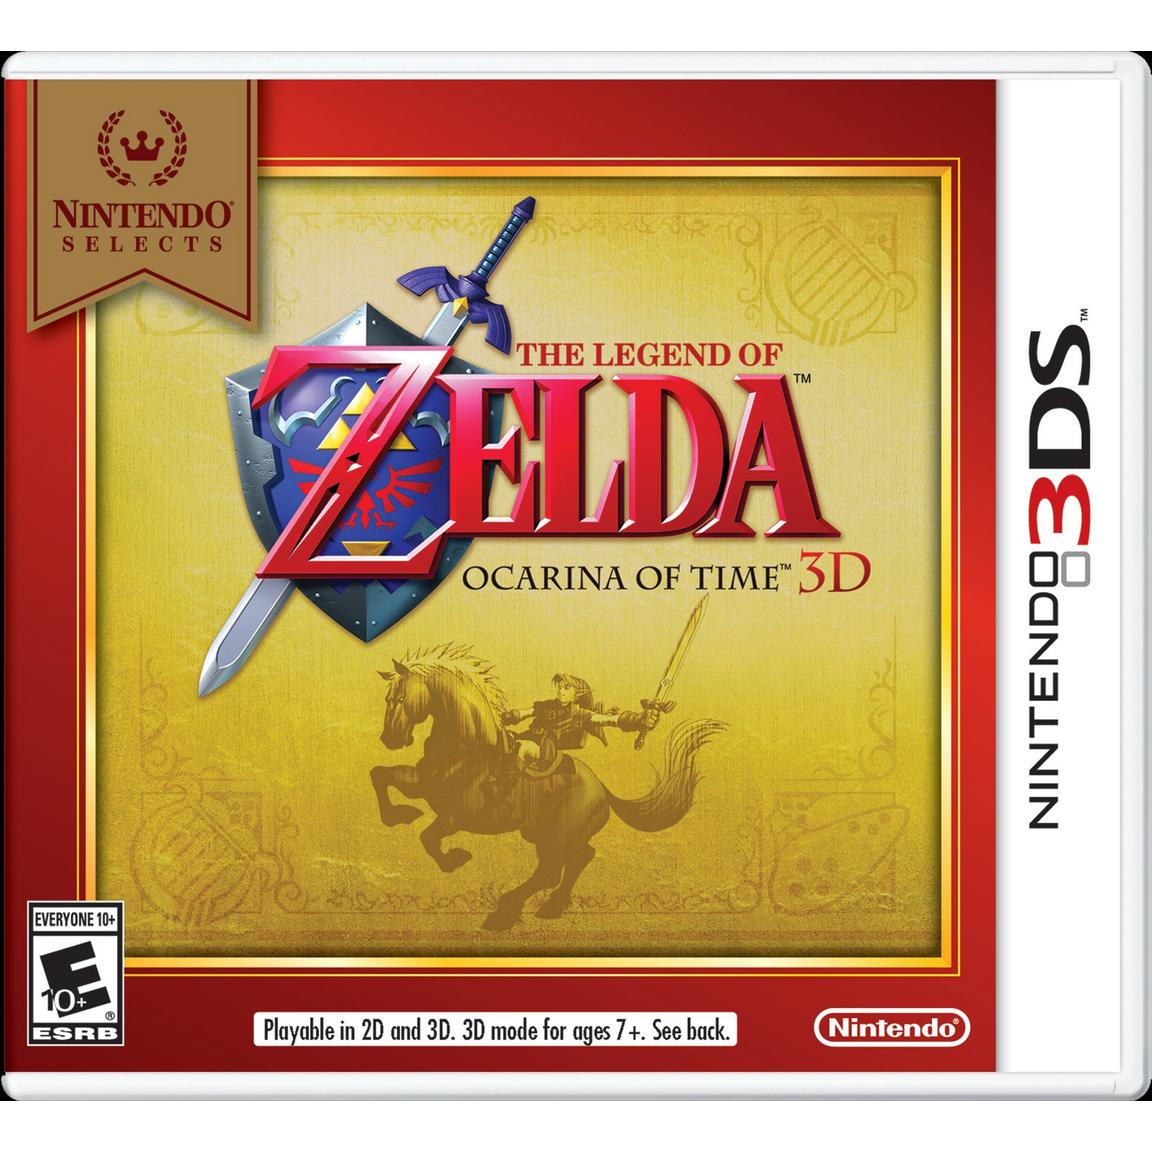 Nintendo Selects The Legend of Zelda: Ocarina of Time 3D - Nintendo 3DS, Pre-Owned